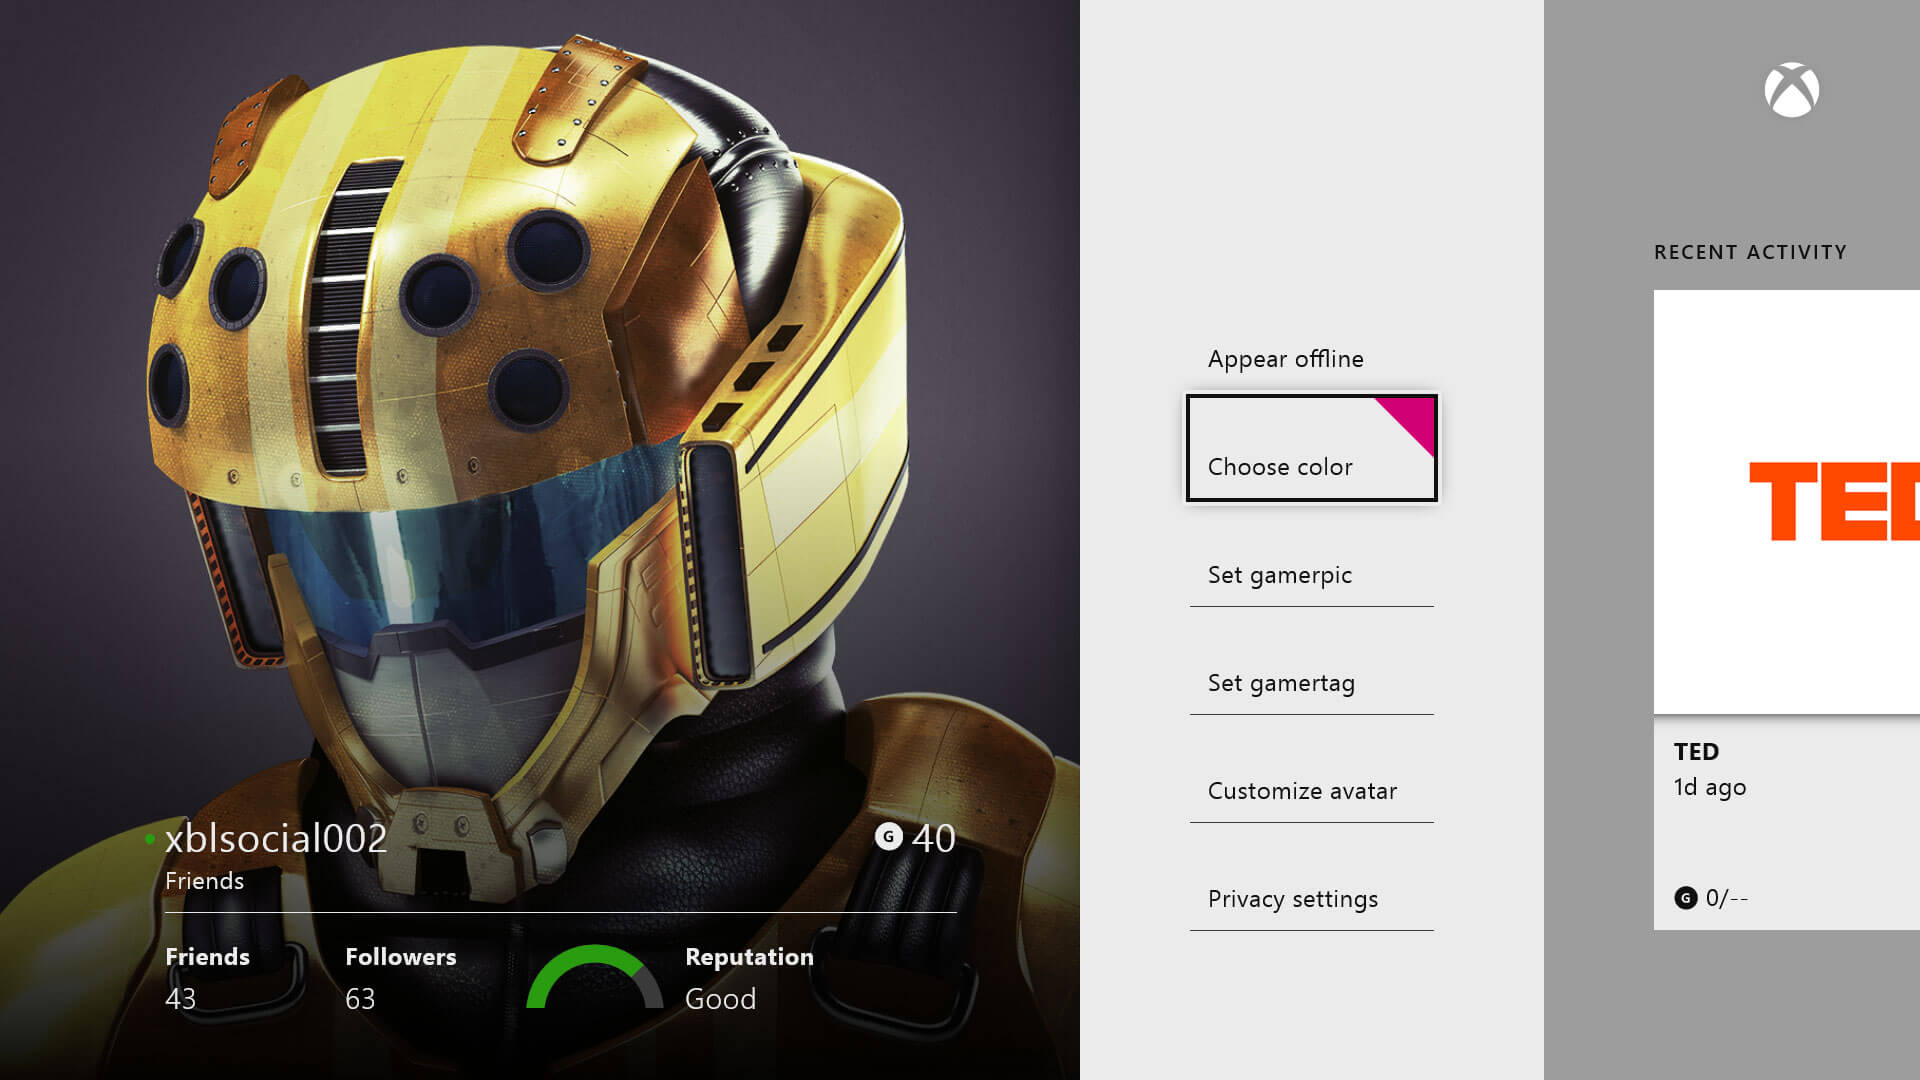 An image of the X-Box One user profile screen. On the left side of the screen is a large profile pic with some profile stats. There is a stylized list on the screen, next to the profile picture, with a large amount of white space between each item. The list reads: appear offline, choose color, set gamerpic, customize avatar, and privacy settings. Each label is underlined.